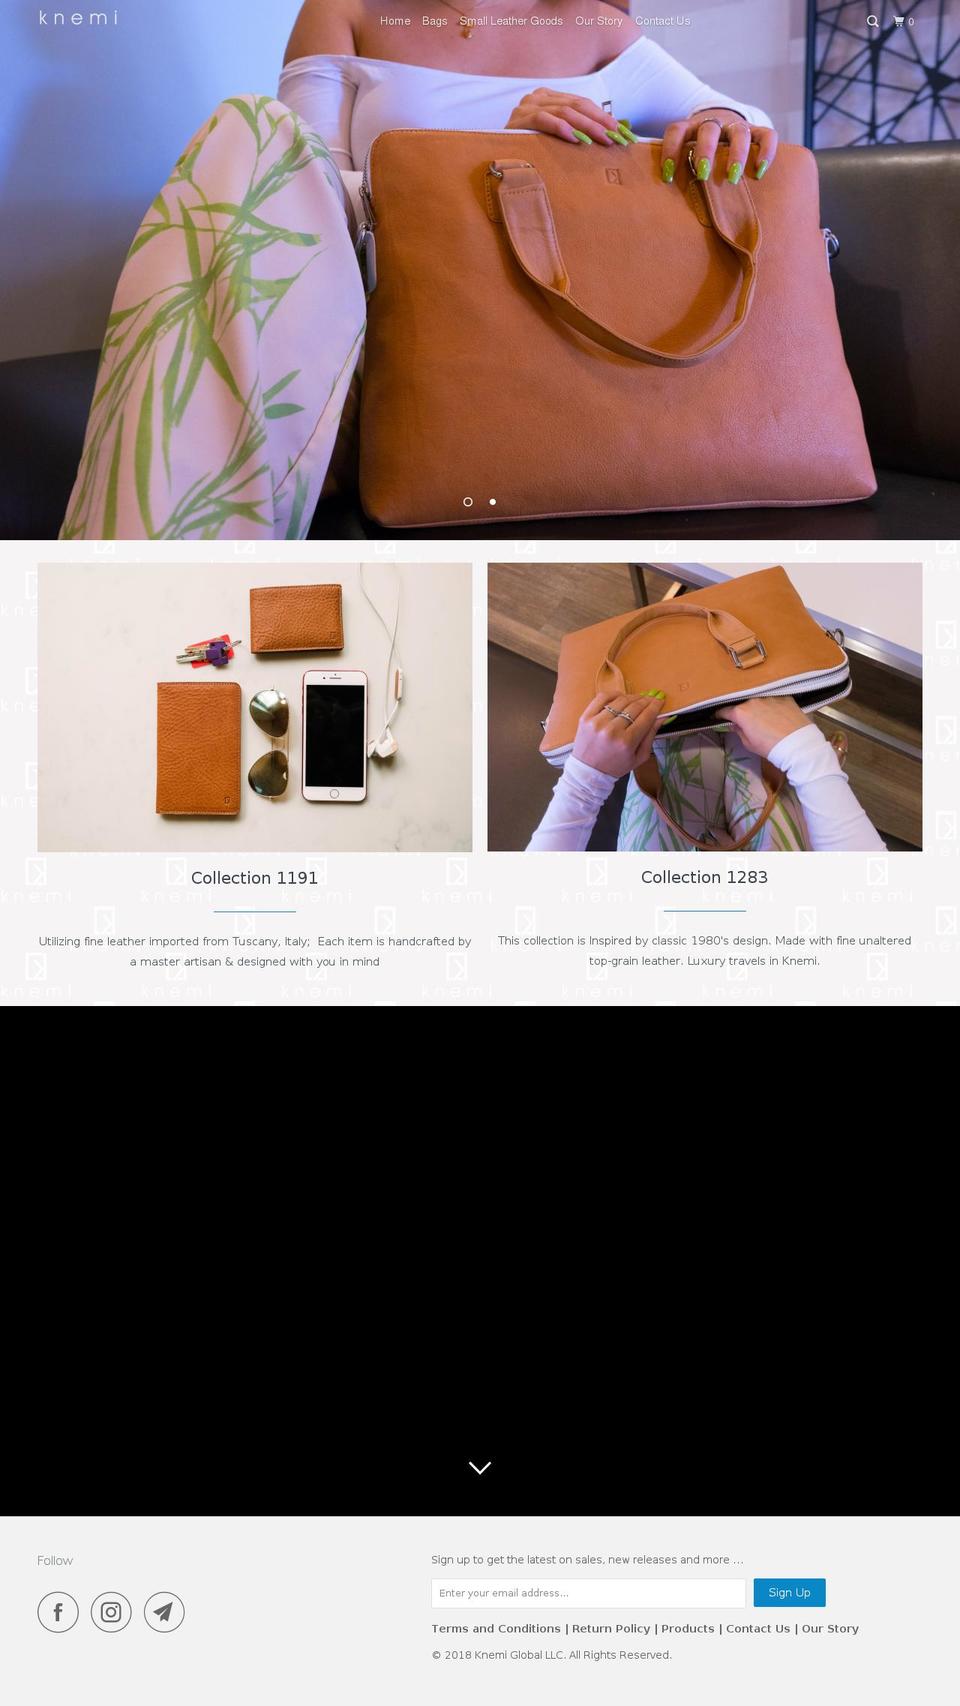 Leather Shopify theme site example knemi.com